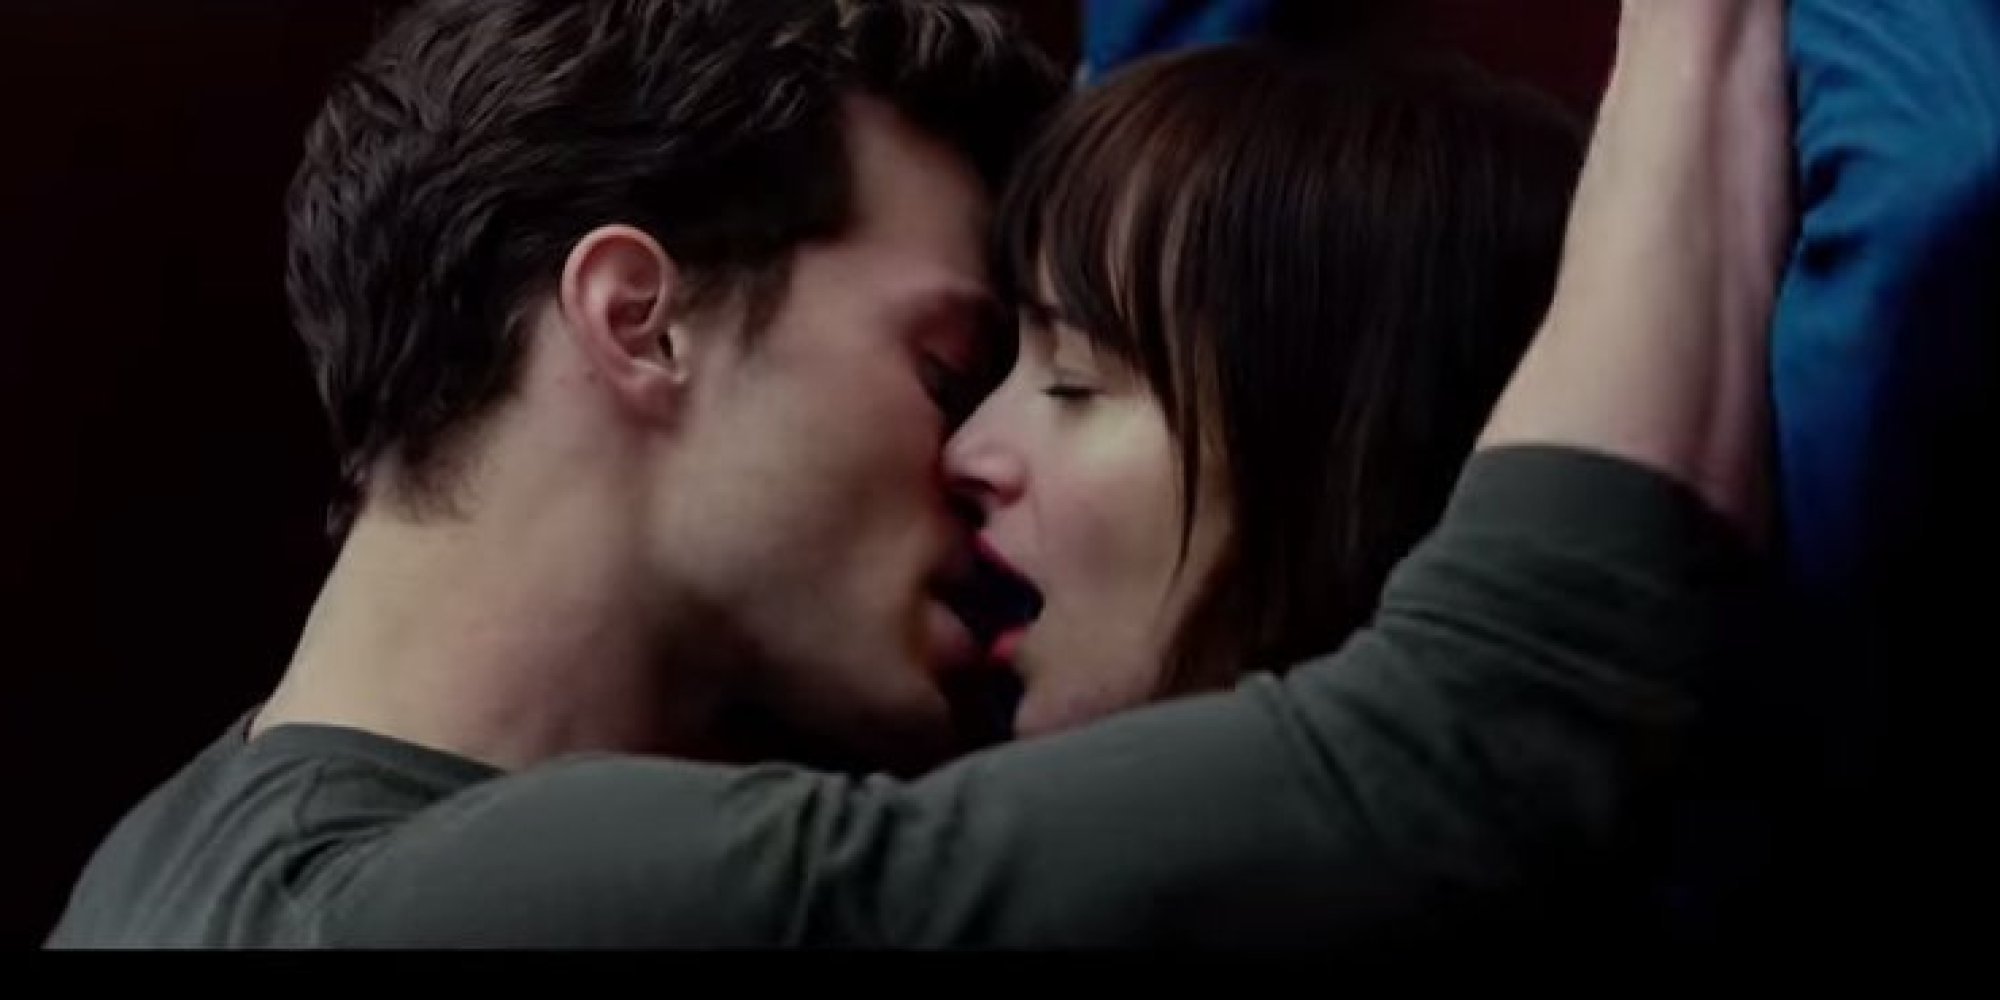 Fifty Shades Of Grey Backgrounds, Compatible - PC, Mobile, Gadgets| 2000x1000 px